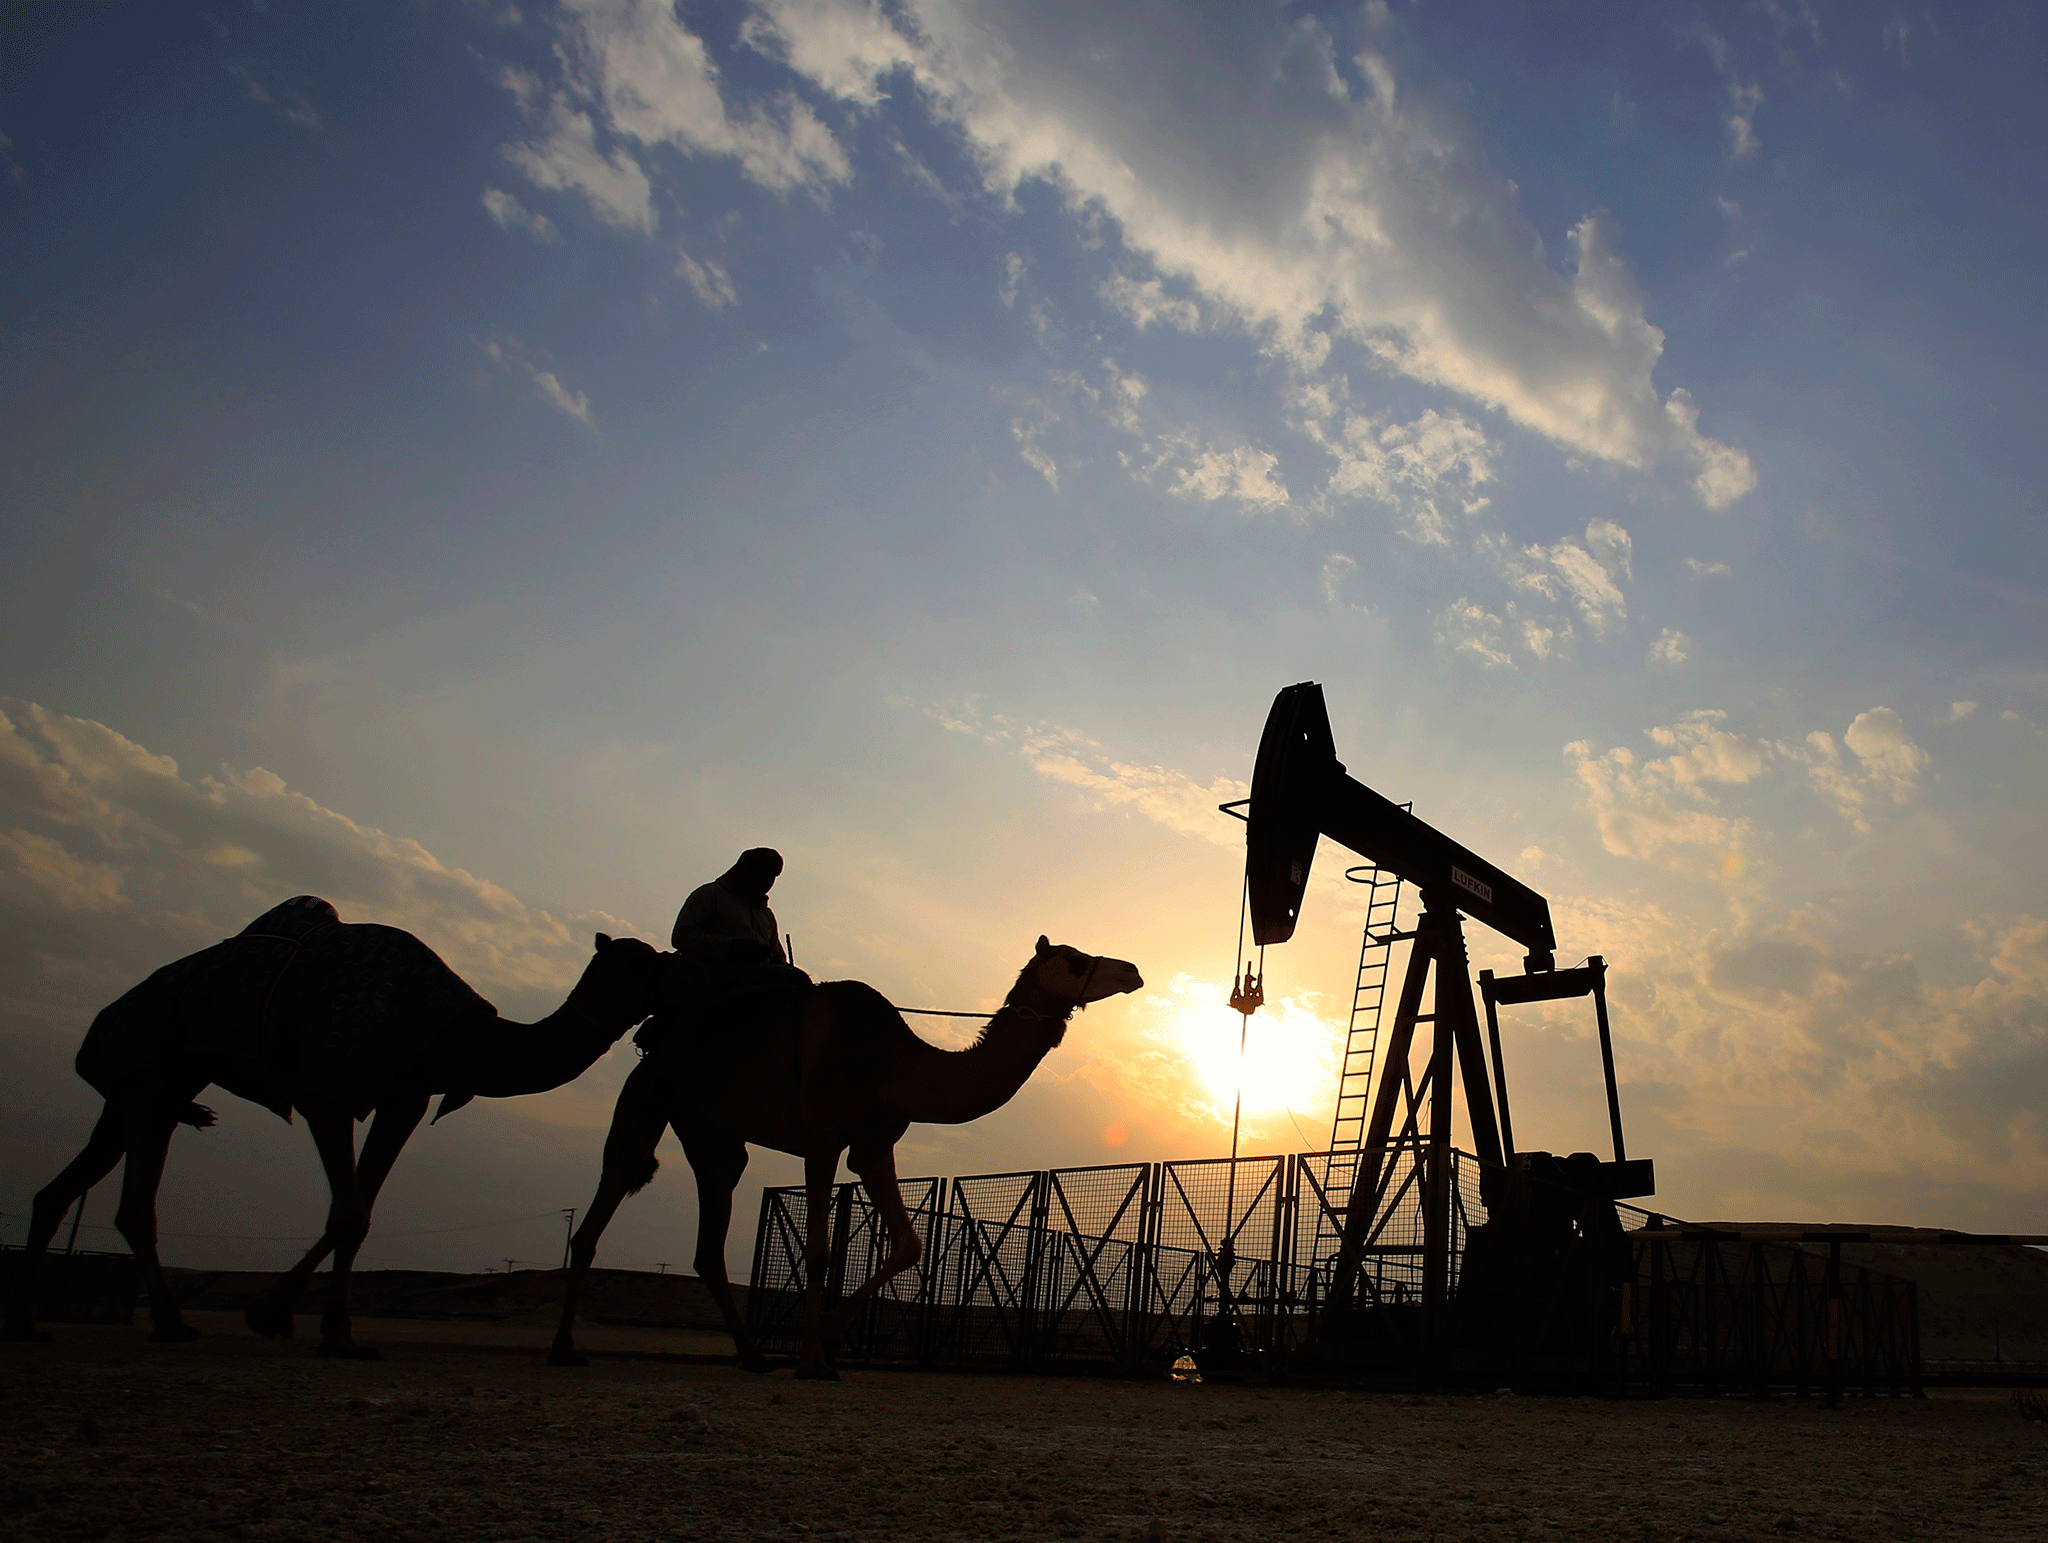 Opec is producing more oil than ever despite flat demand